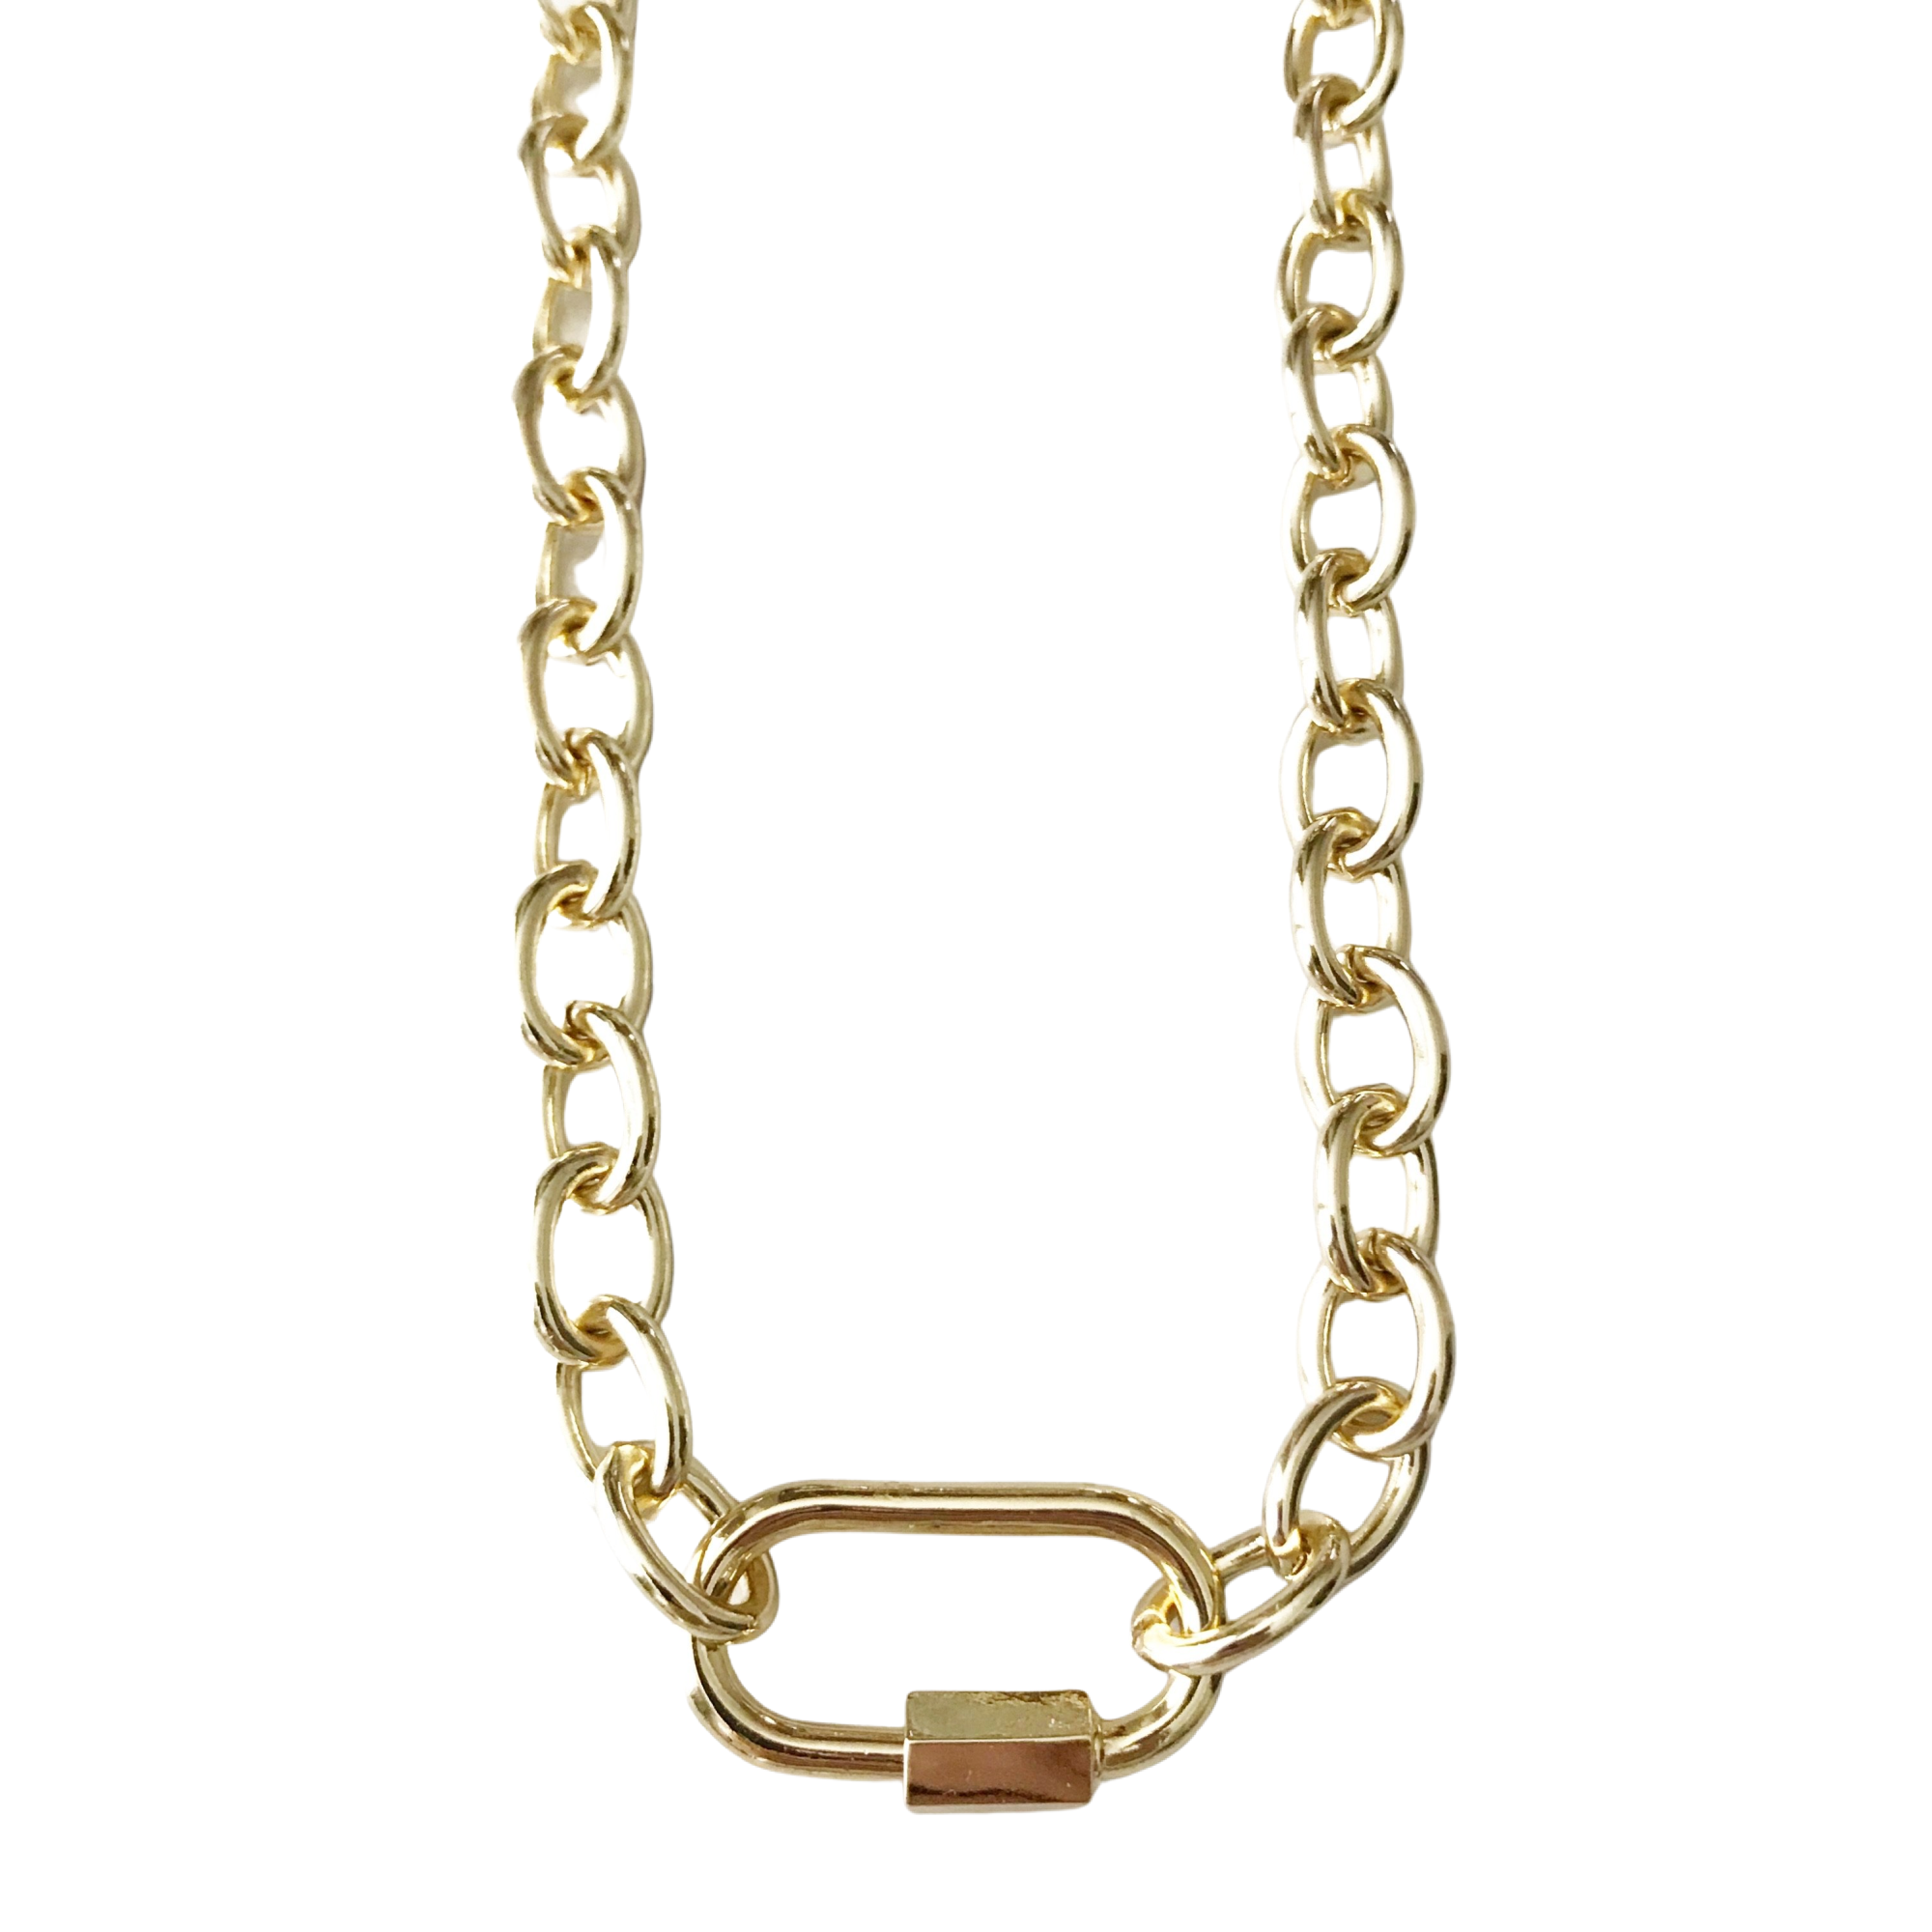 Gold Market Necklace King and Carabiner – Chunky